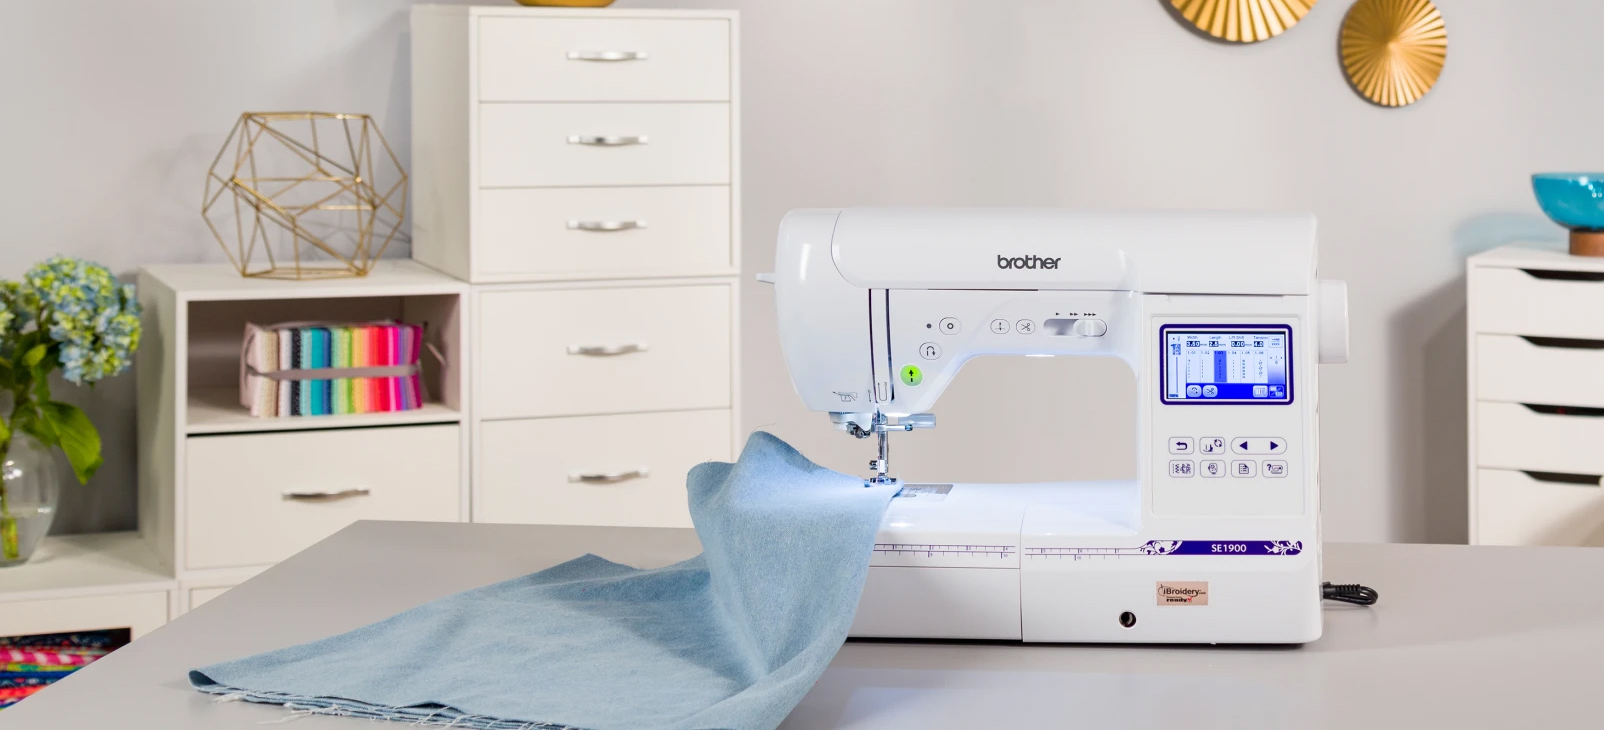 Brother SE1900 Sewing and Embroidery Machine lifestyle image